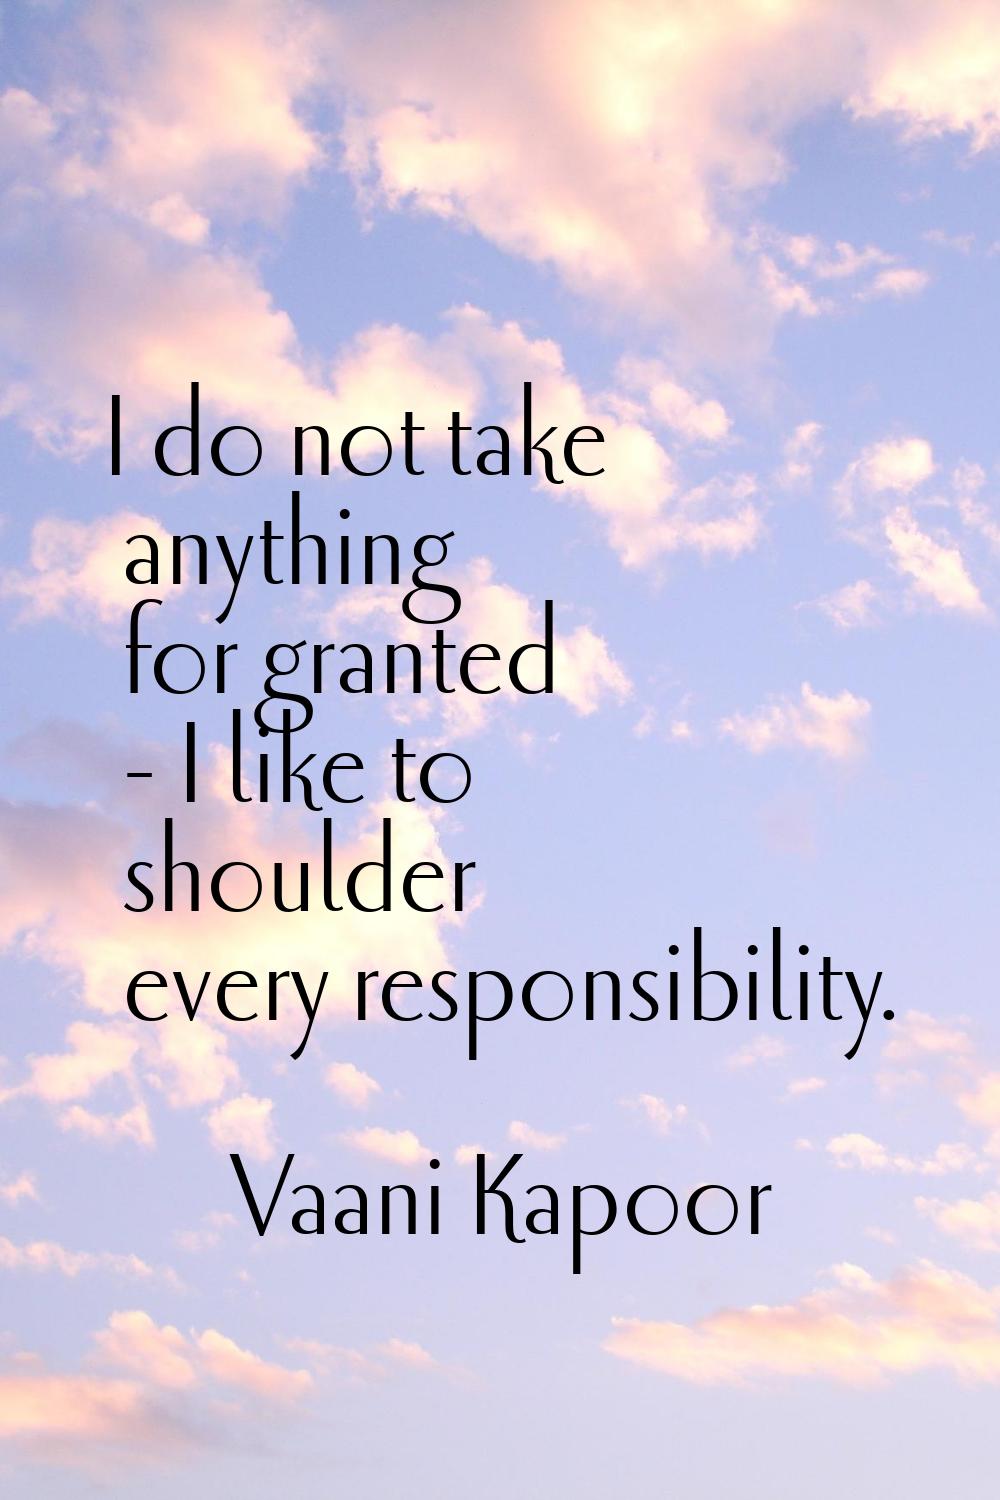 I do not take anything for granted - I like to shoulder every responsibility.